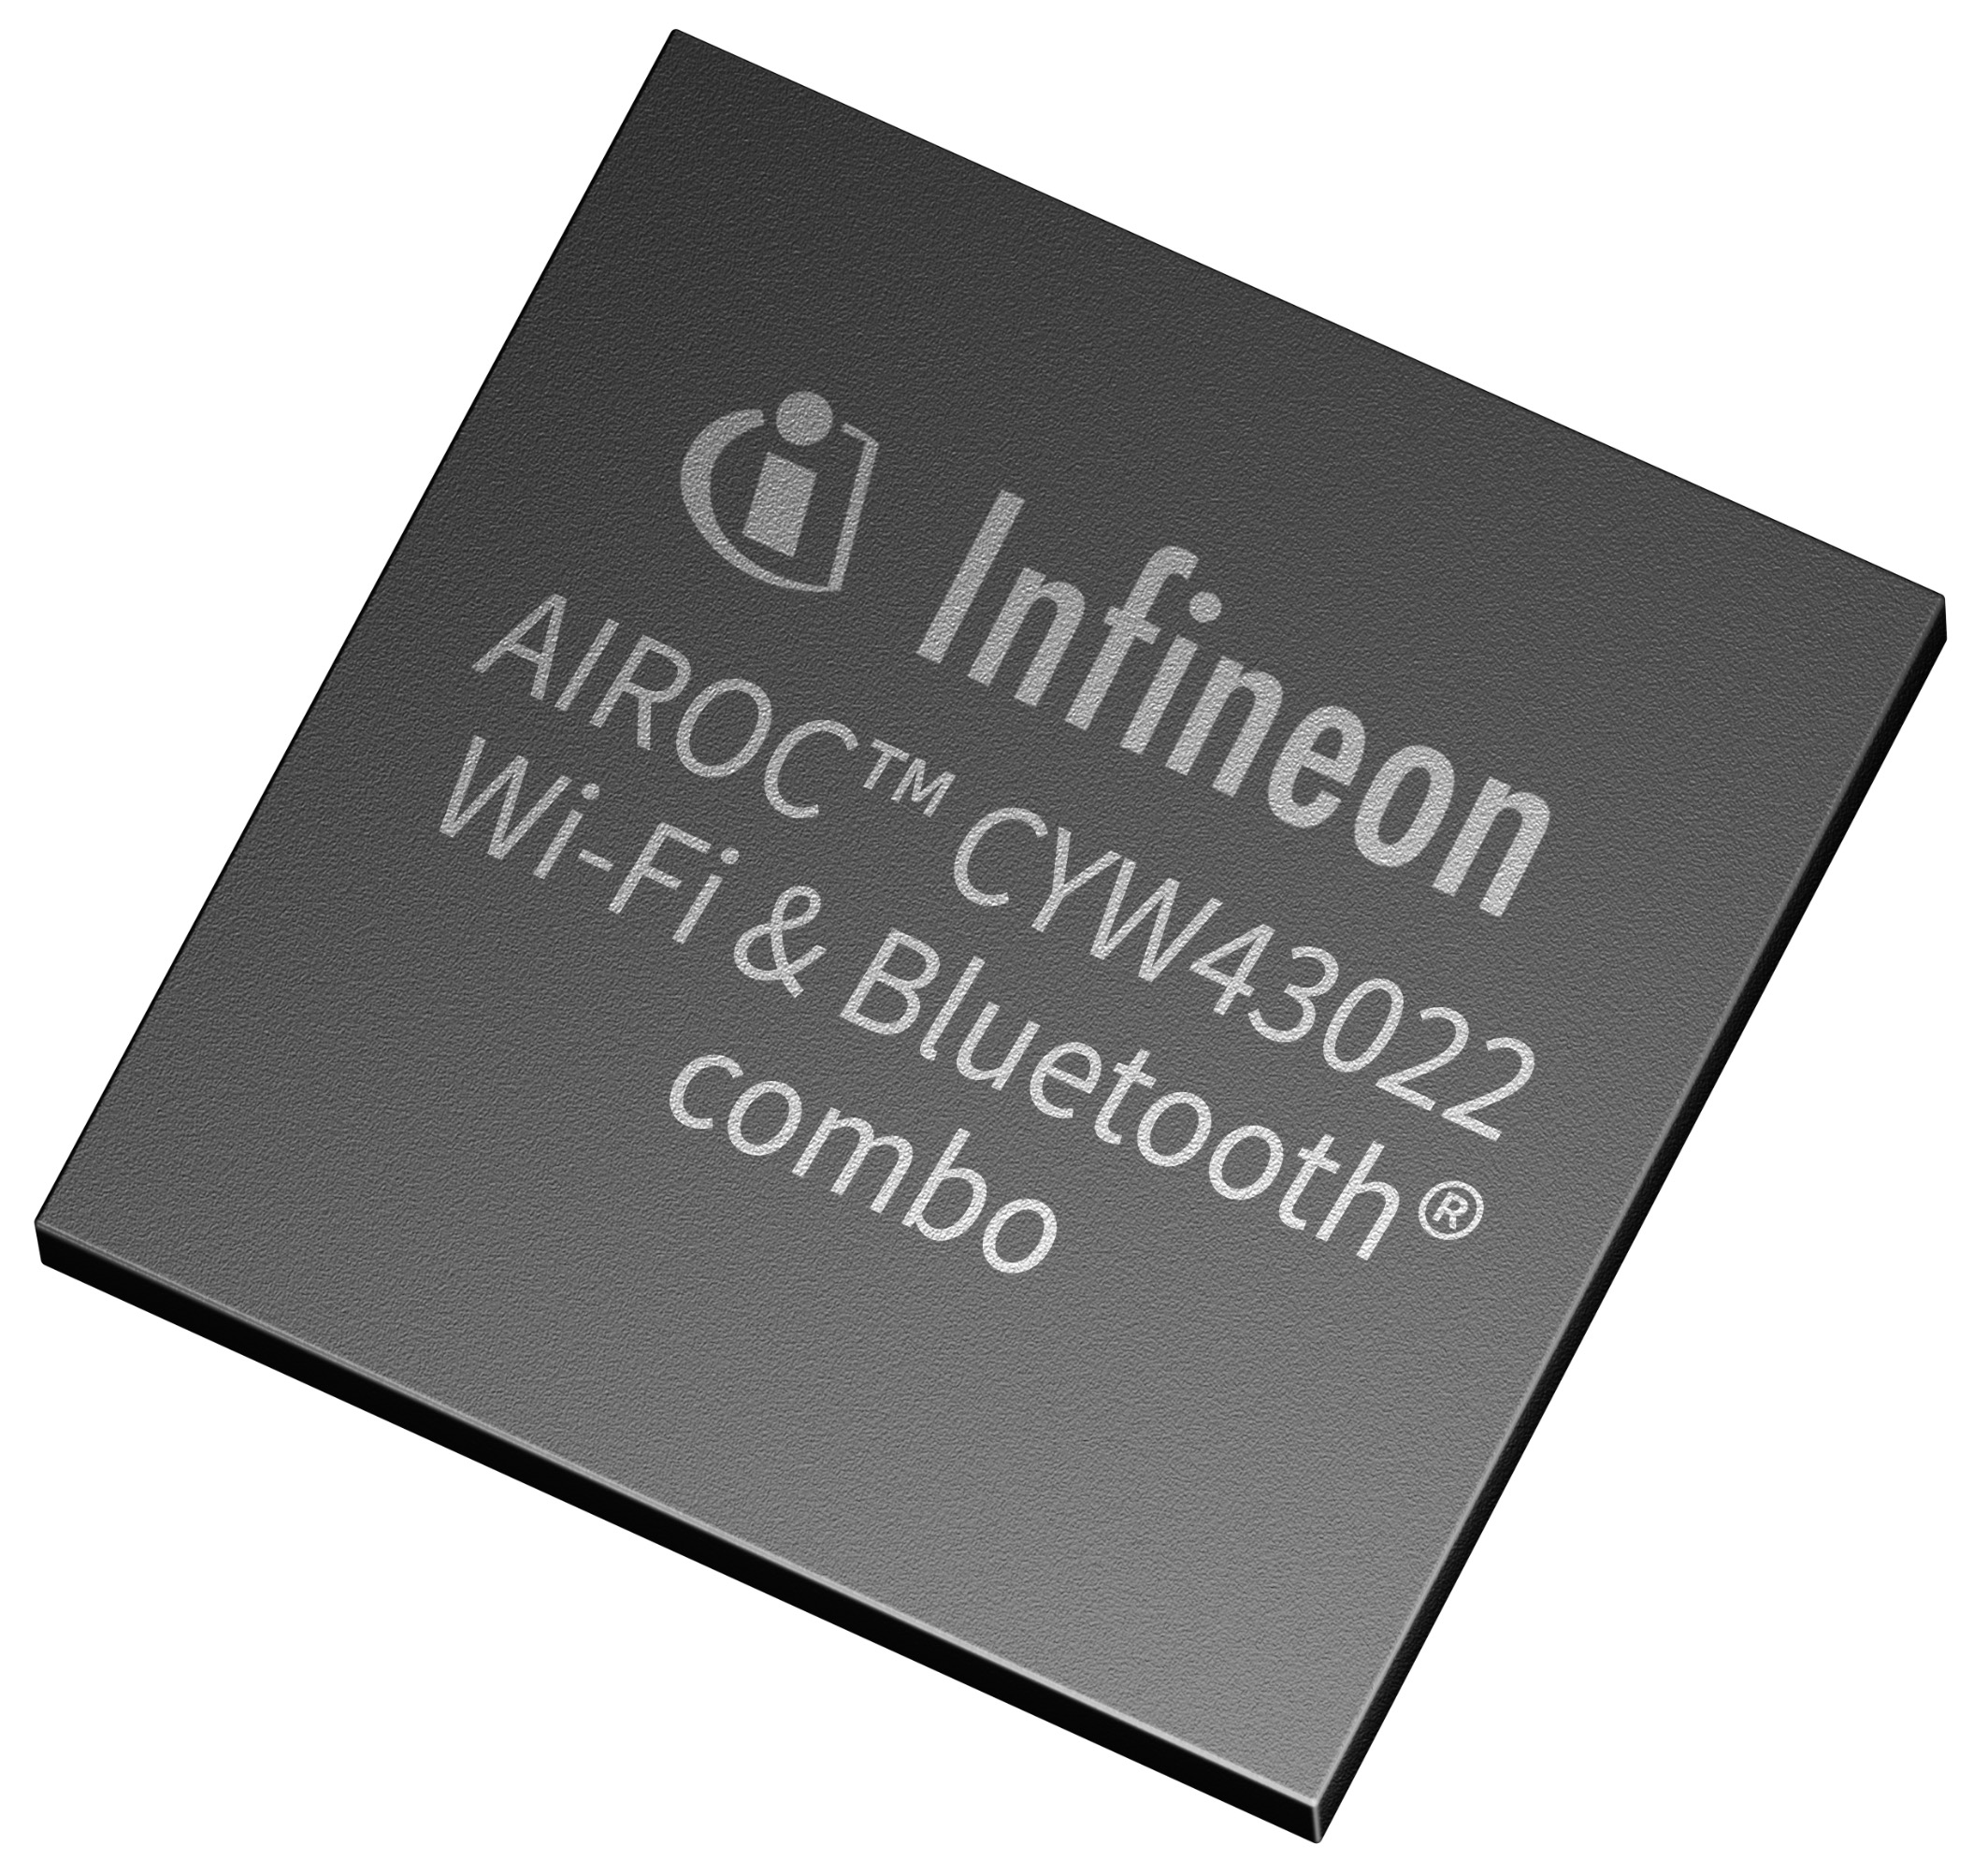 Infineon introduces AIROC™ CYW43022 Wi-Fi 5 and Bluetooth® 2-in-1 product, which reduces power consumption by 65%, significantly extending battery life in IoT applications - 图片